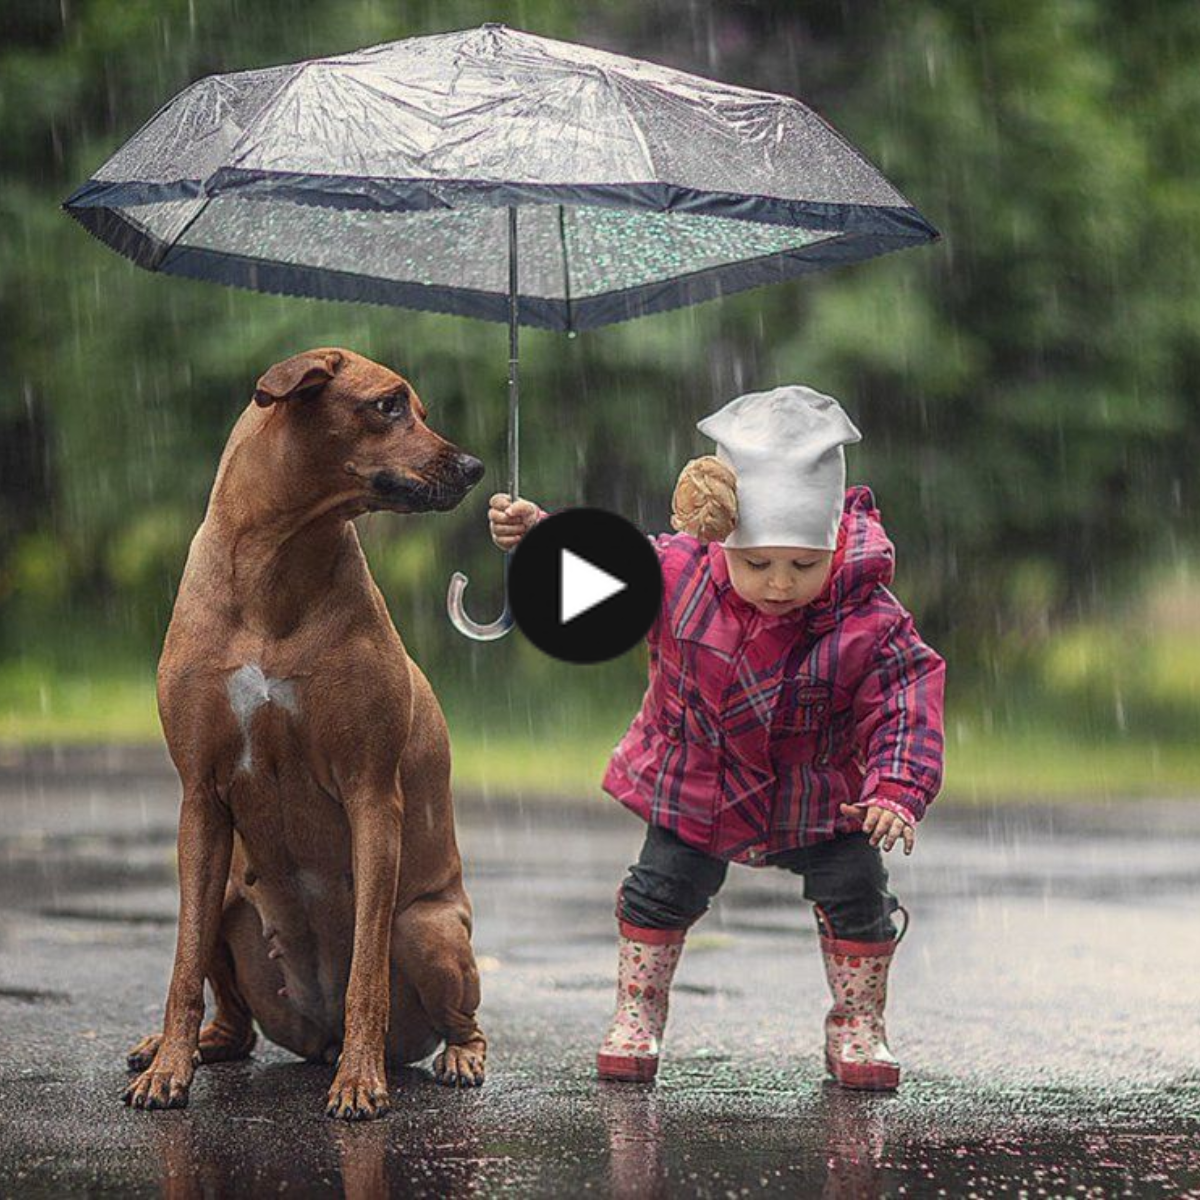 touching action: A child’s profound emotional response to a grieving dog